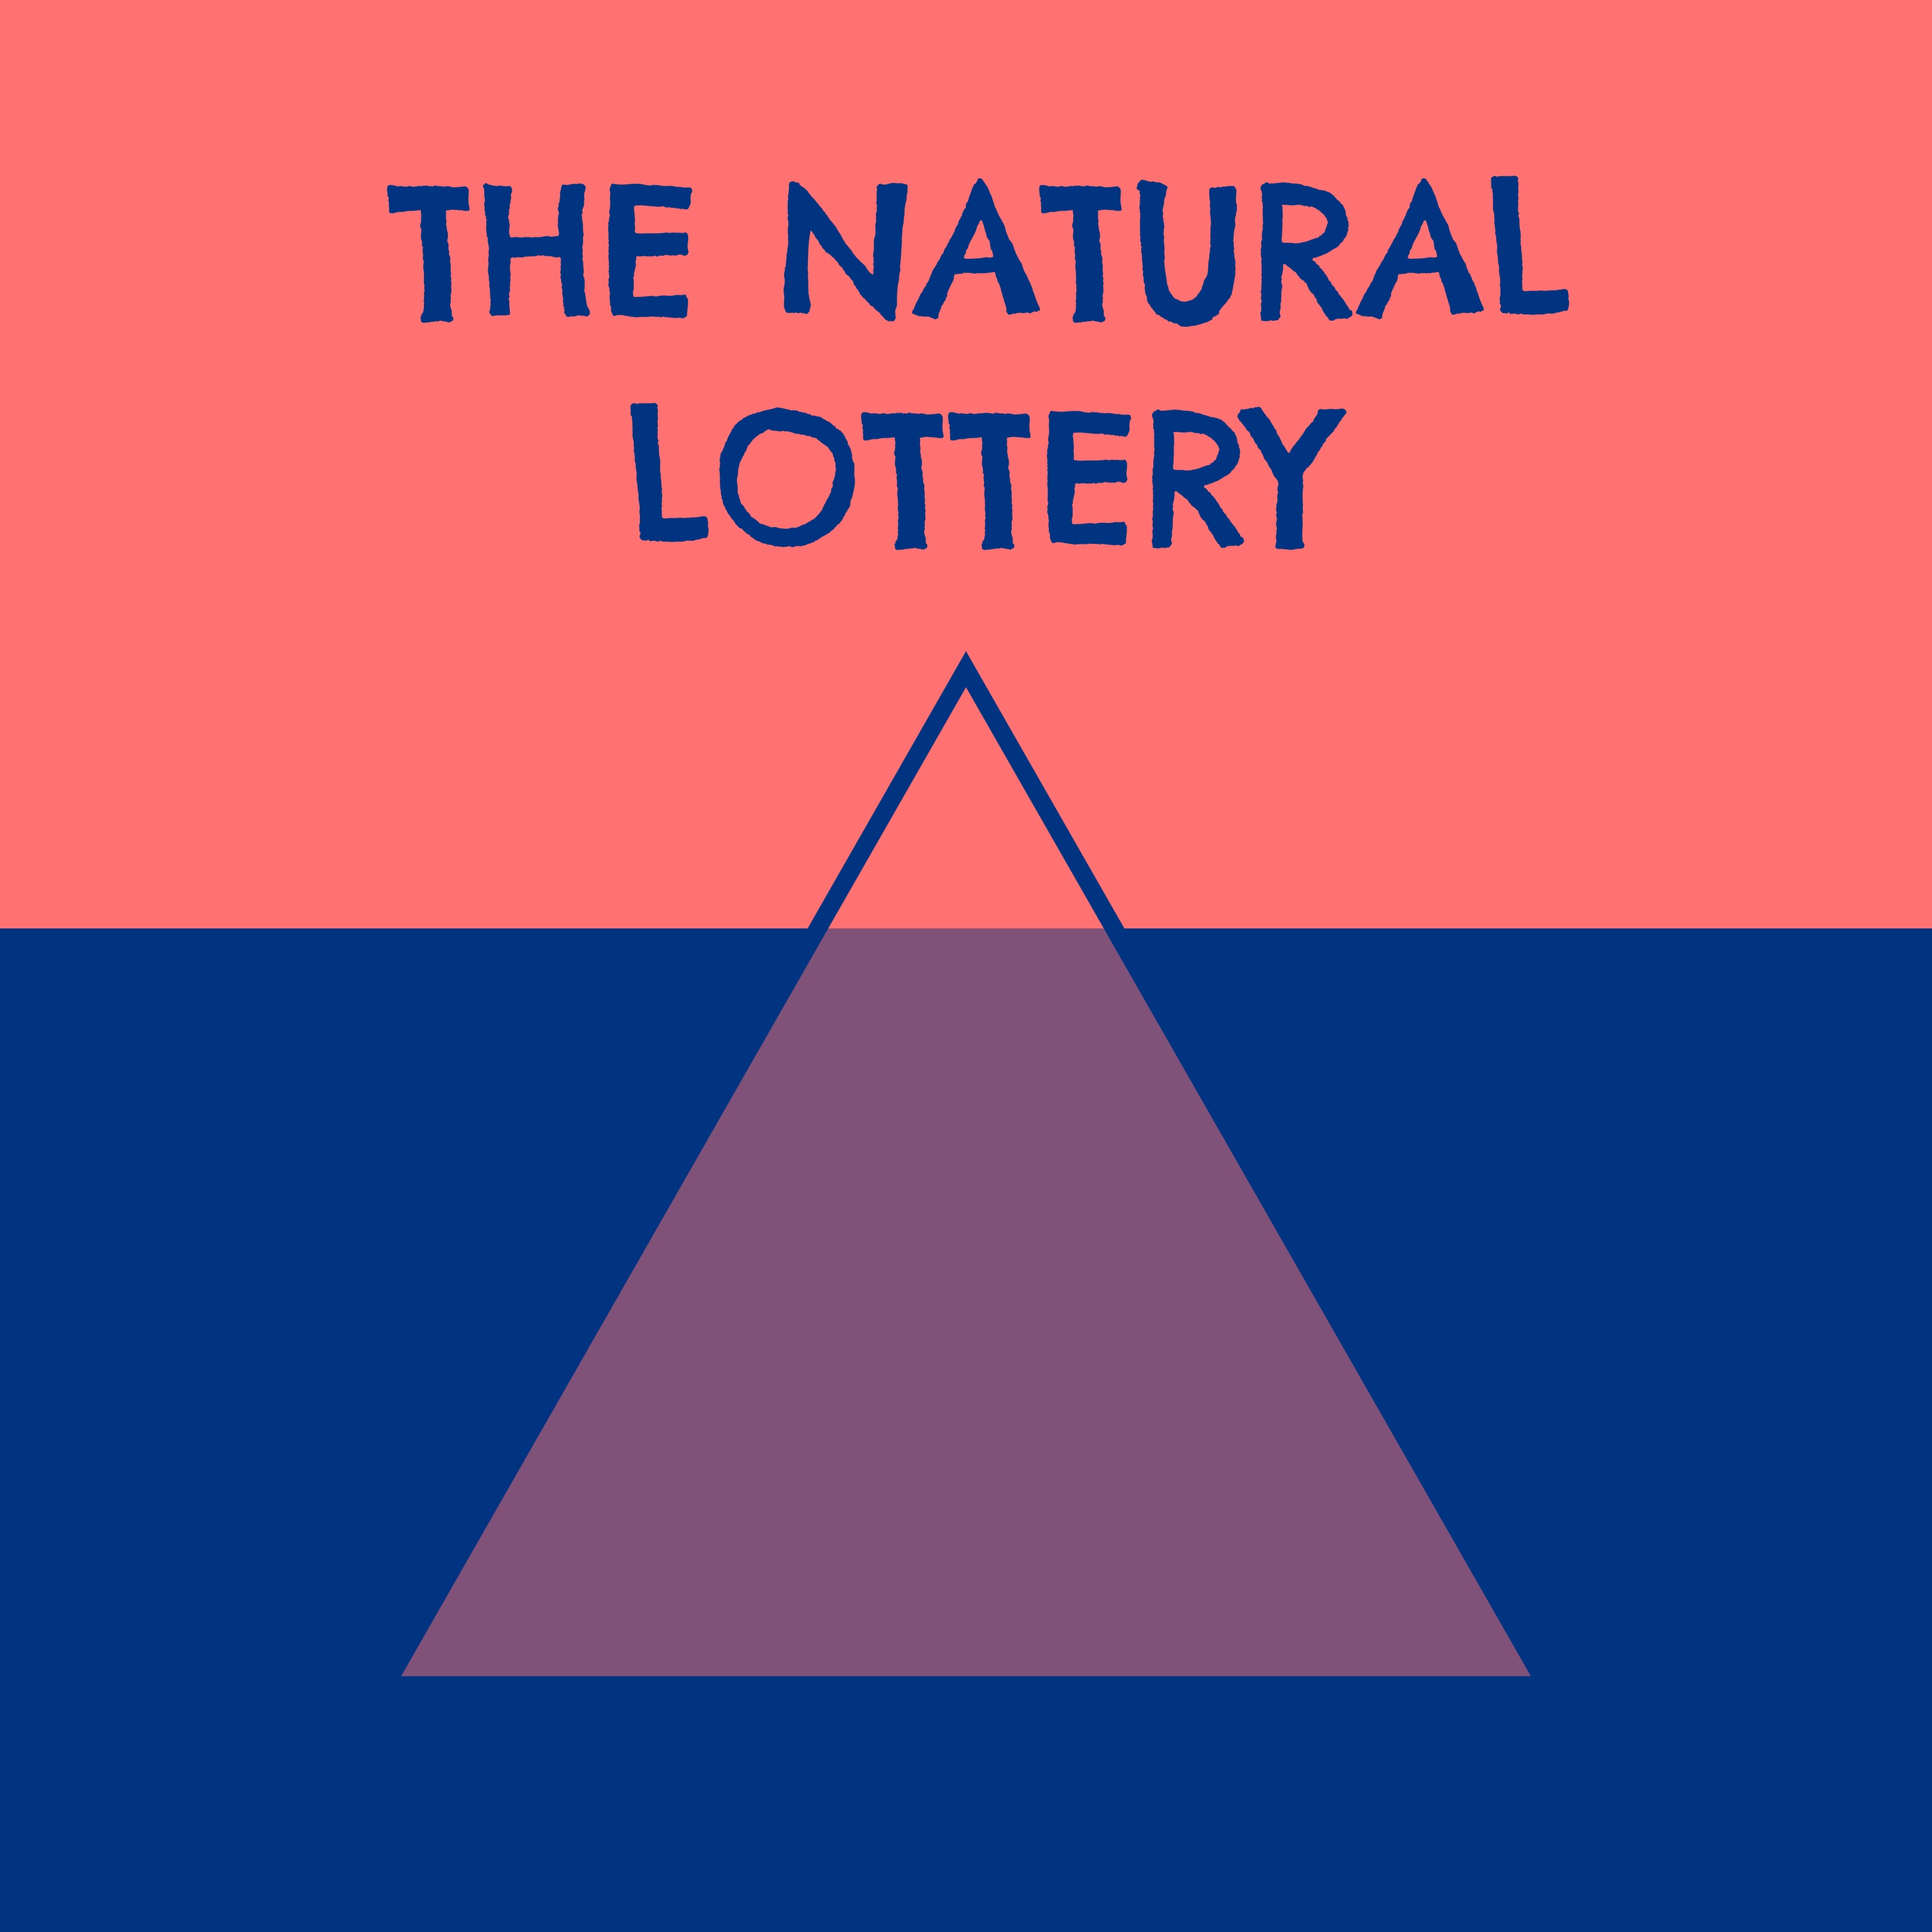 The Natural Lottery